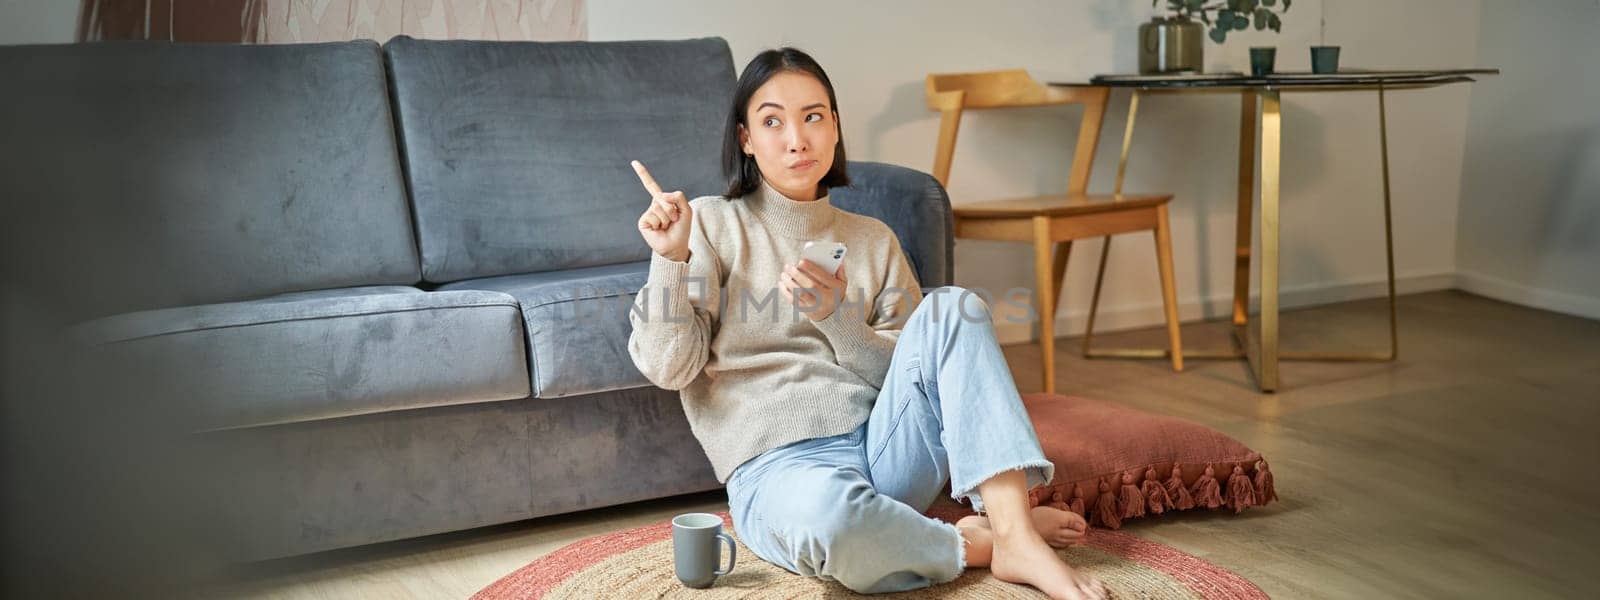 Portrait of woman sitting on floor with smartphone, looking thoughtful and pointing finger at banner, promo advertisement on top right corner.